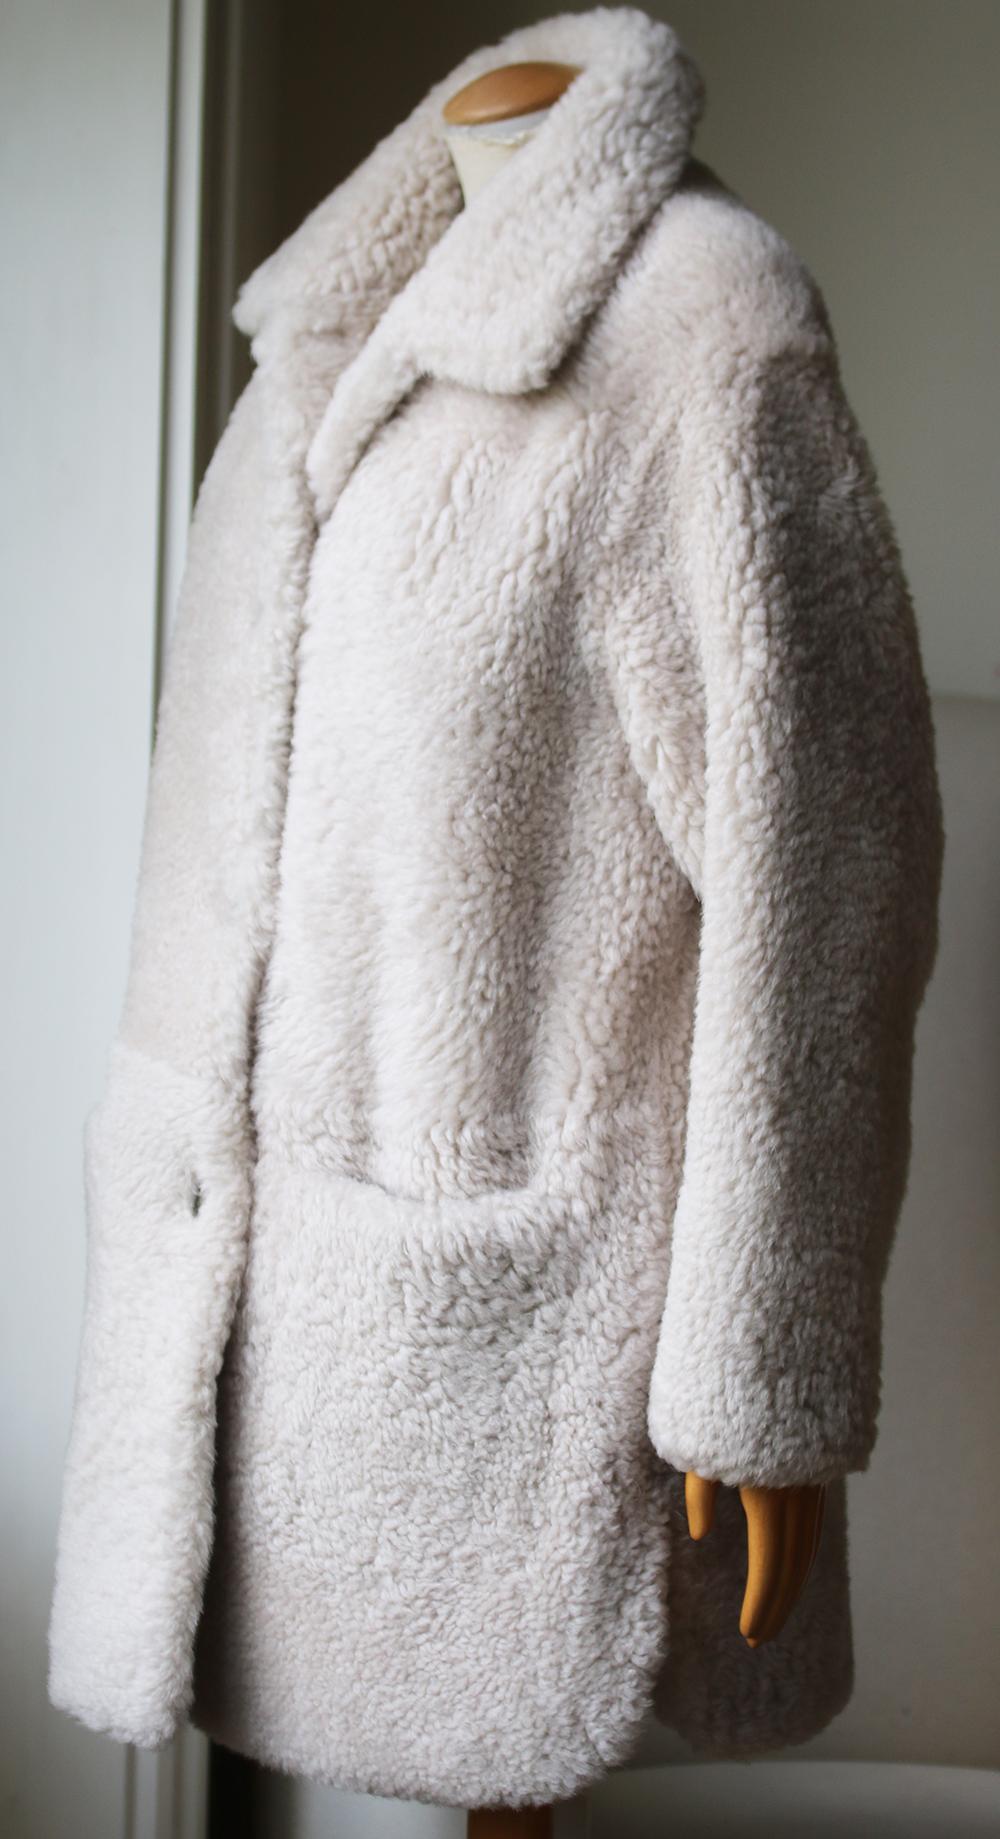 This teddy shearling jacket in a soft blush is the epitome of chic comfort. Dark buttons add contrast while patch pockets and a pointed collar keep this style classically functional. 100% Lamb Shearling.

Size: Small (UK 8, US 4, FR 36, IT